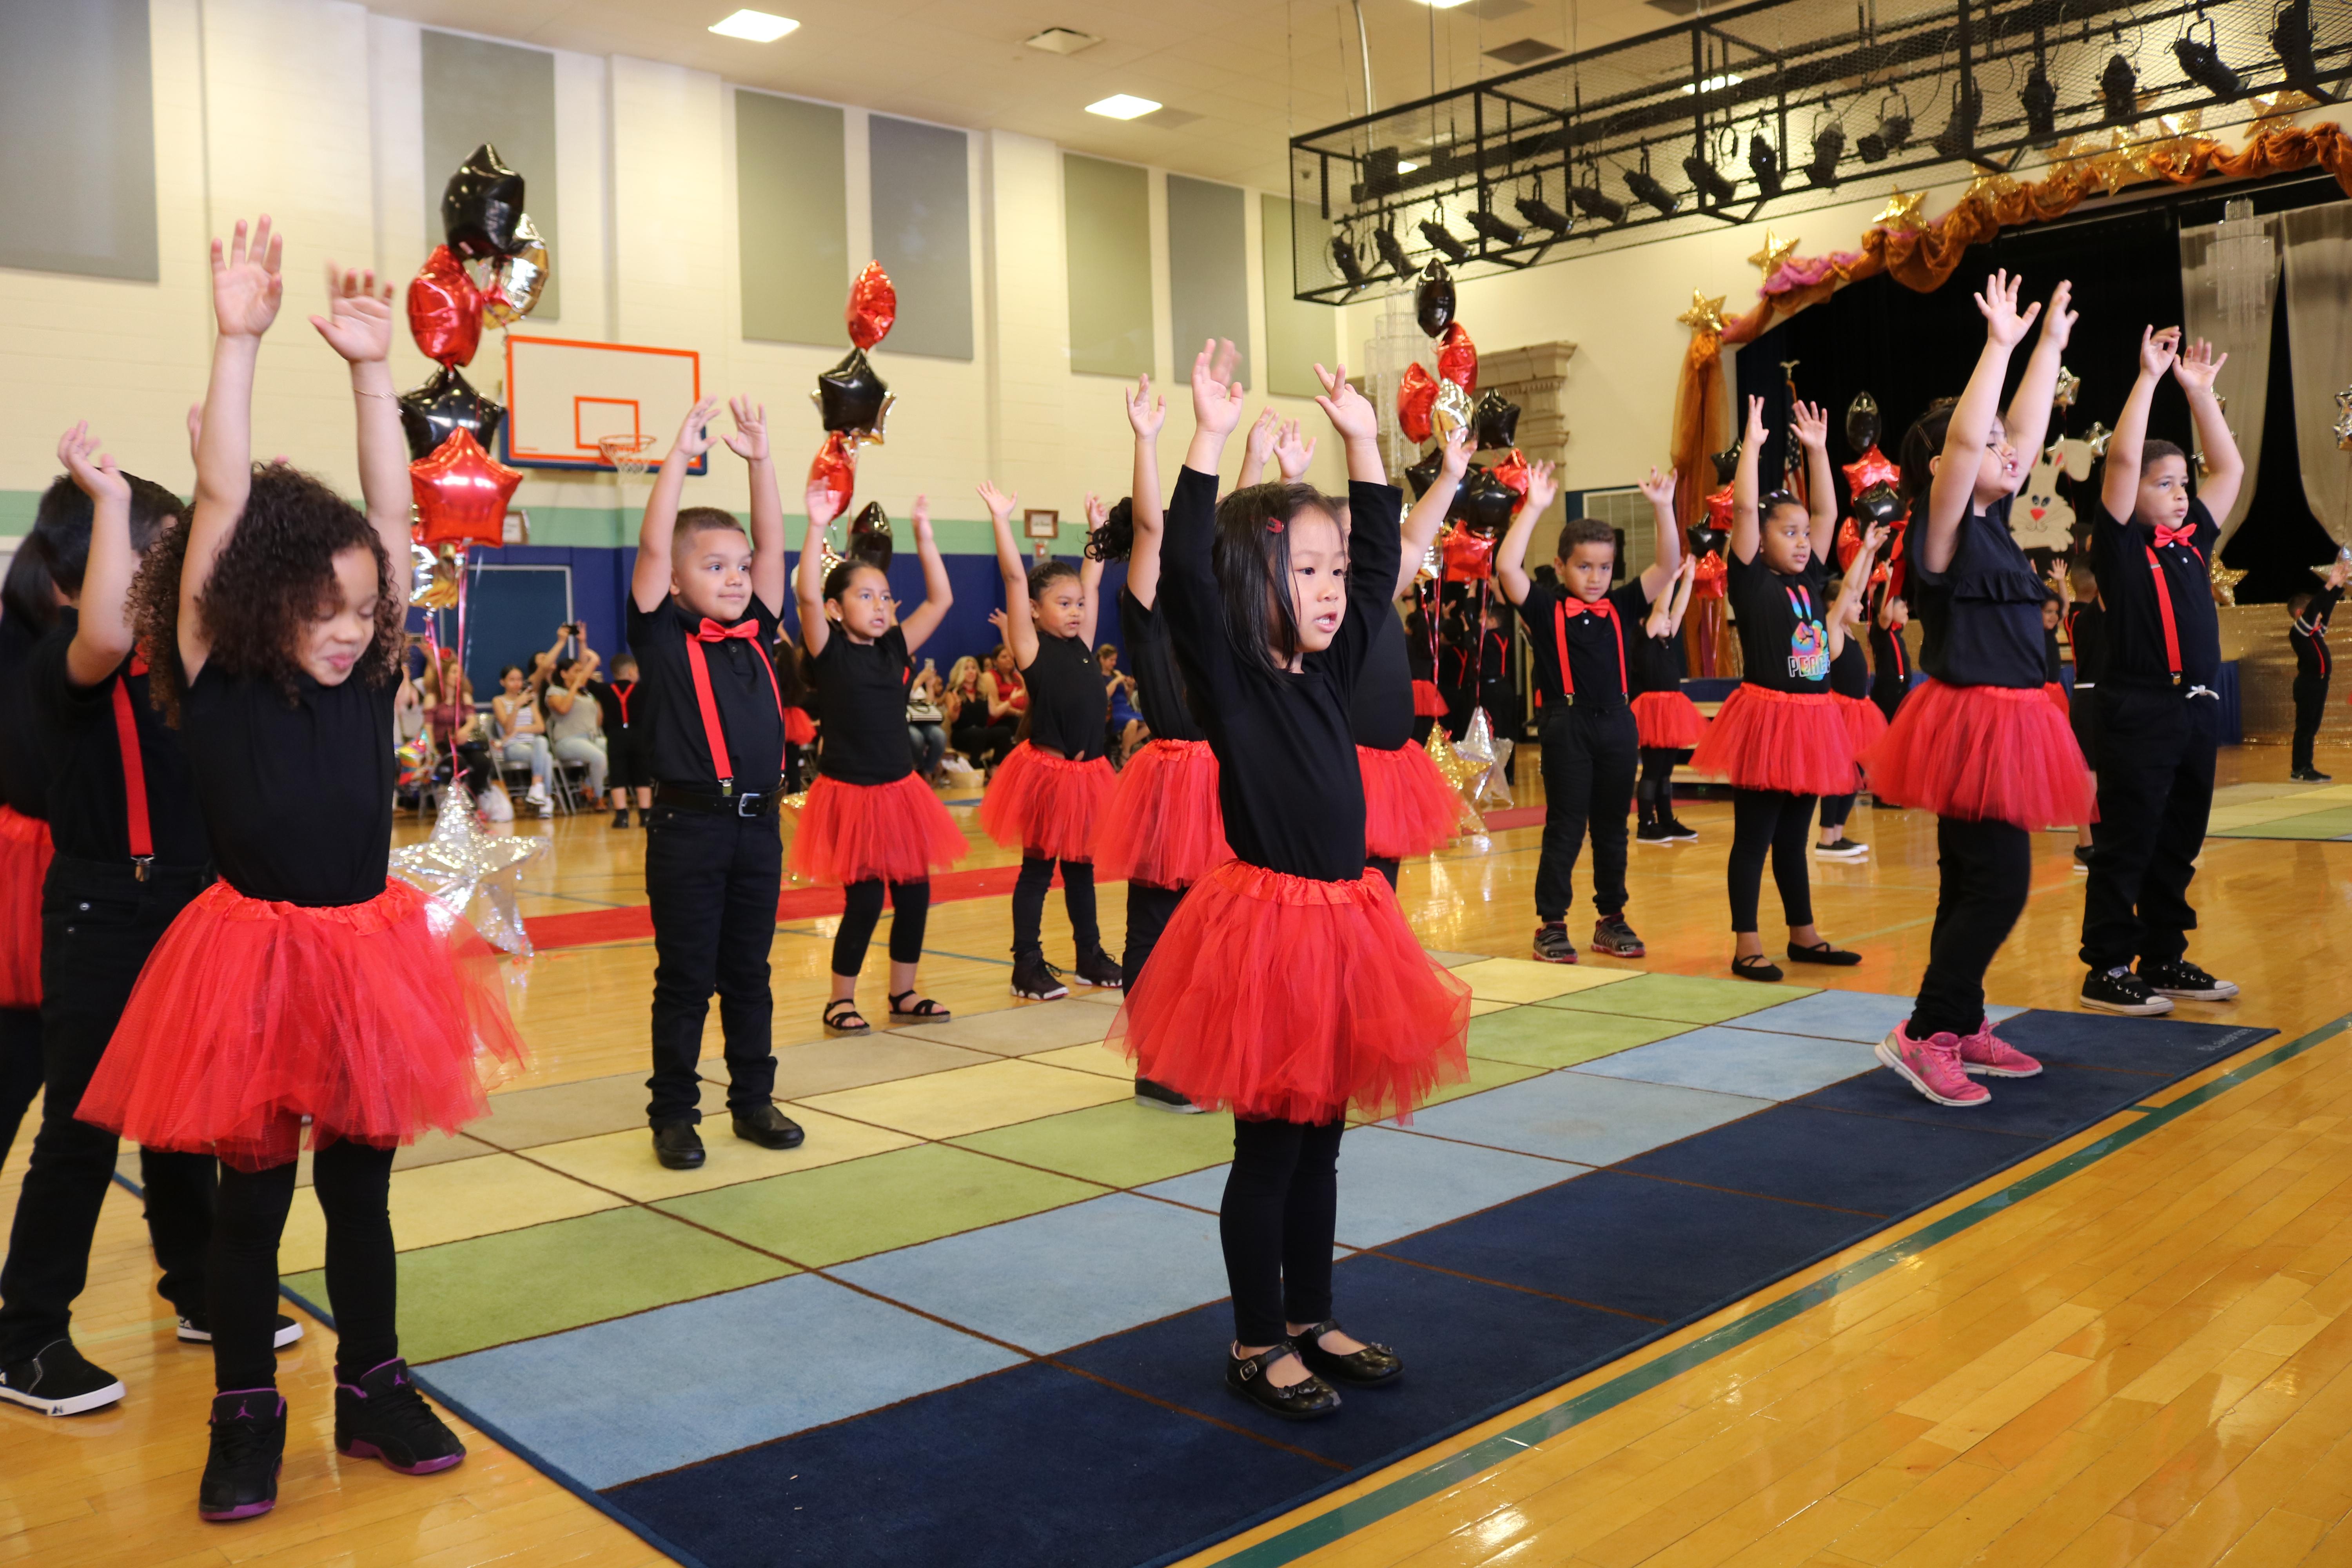 group of kindergarten kids singing with their hands up in the air